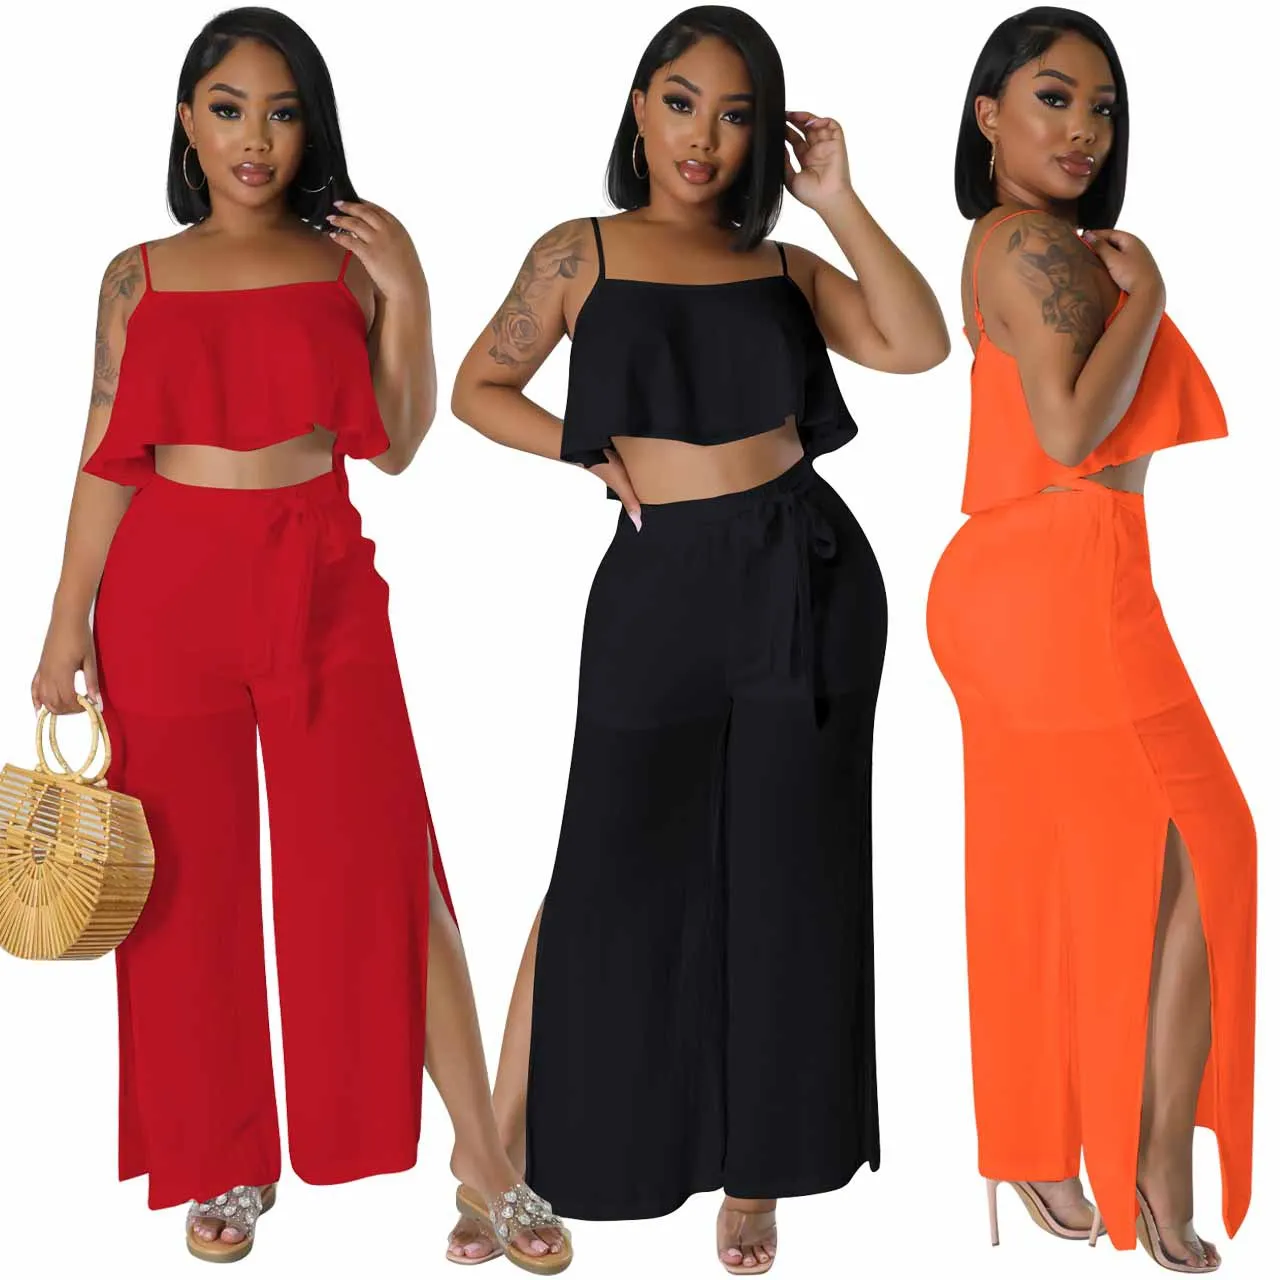 

Strapless High Waisted Grid With Sexy Fashion Outfits Two Set Top Tunic Beach Long Pareo Praia Ladies Clothing Female Swimwear